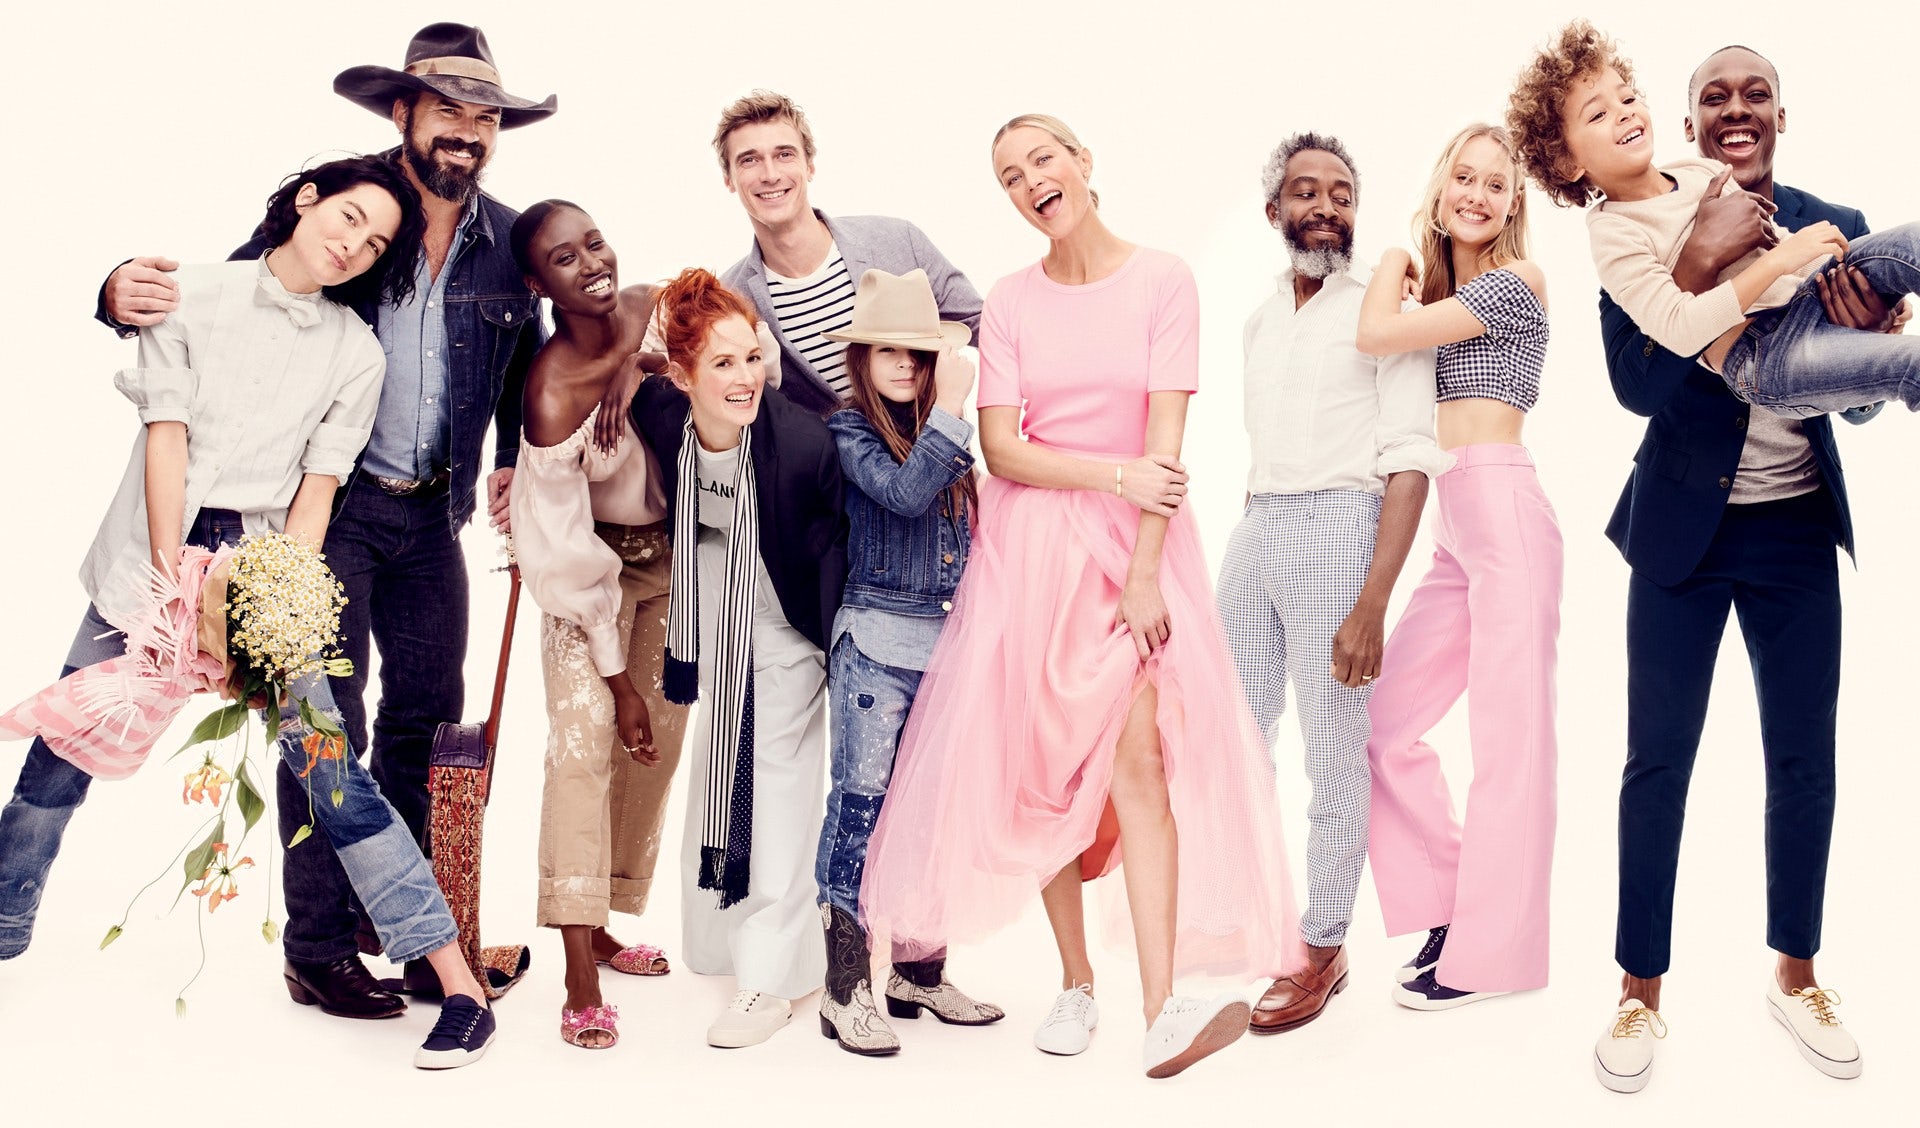 j-crew-group | The Business of Fashion